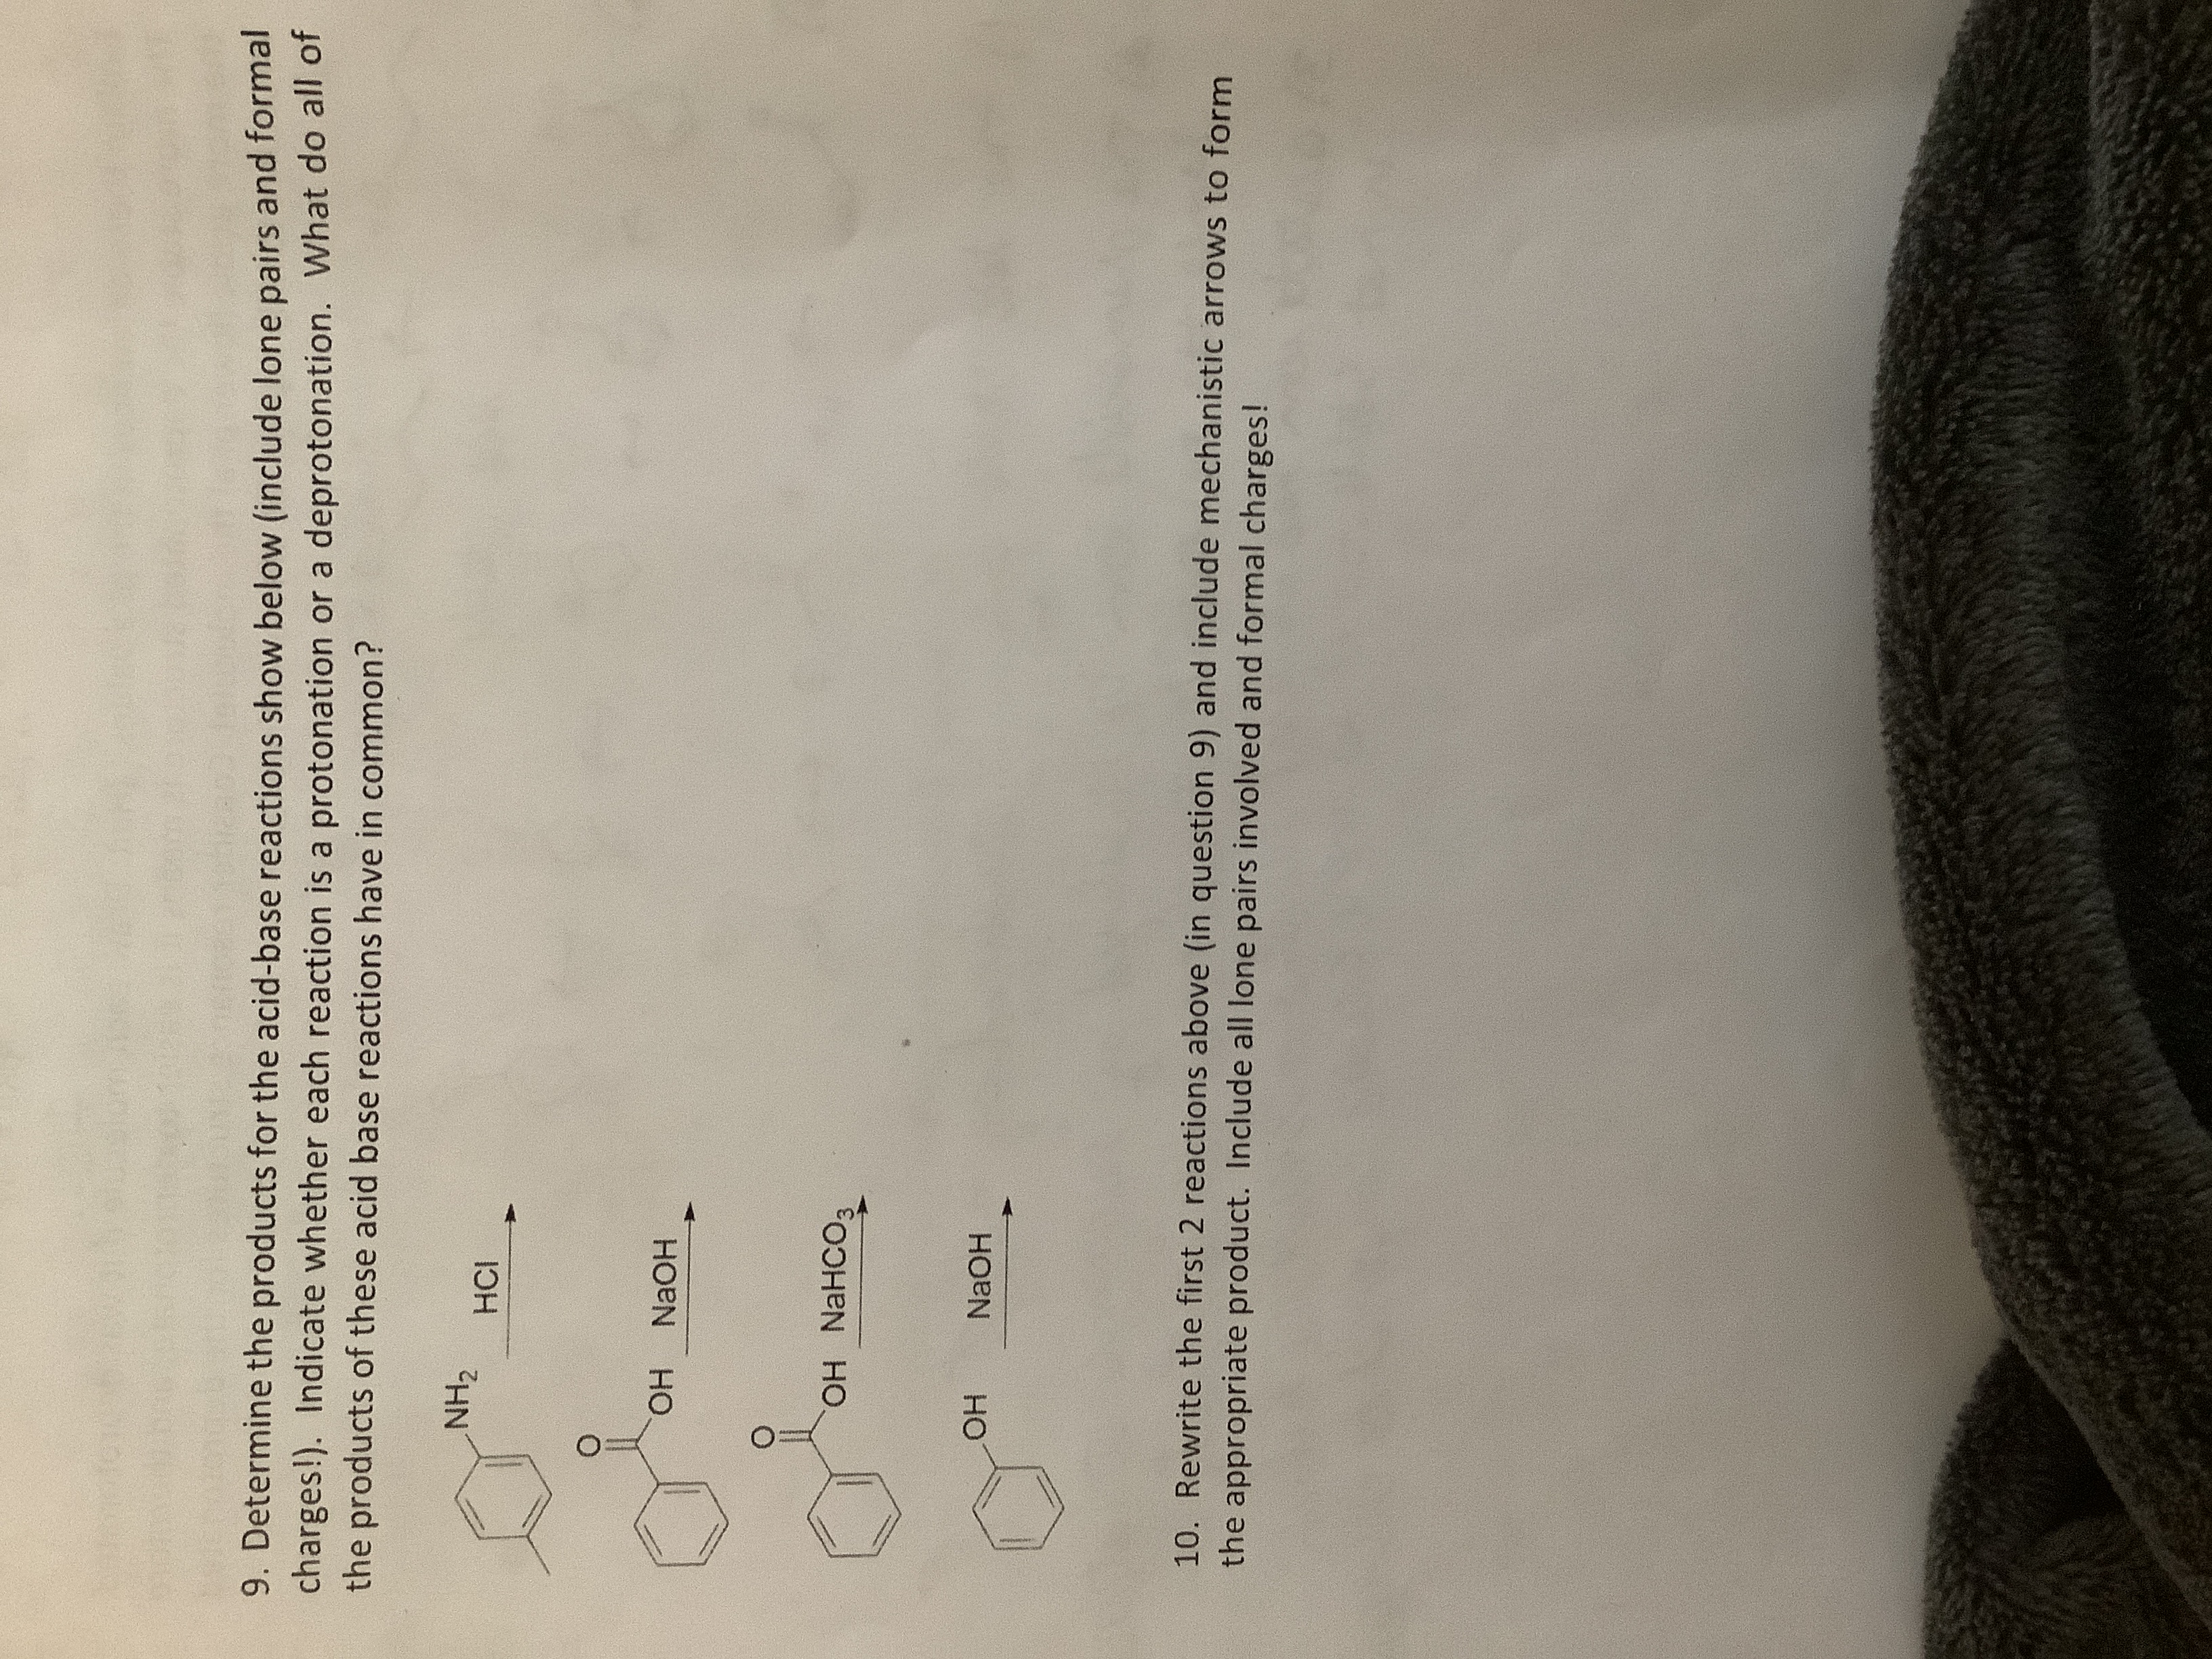 9. Determine the products for the acid-base reactions show below (include lone pairs and formal
charges!). Indicate whether each reaction is a protonation or a deprotonation. What do all of
the products of these acid base reactions have in common?
NH2
HCI
ОН
NaOH
OH NAHCO3
ОН
NaOH
10. Rewrite the first 2 reactions above (in question 9) and include mechanistic arrows to form
the appropriate product. Include all lone pairs involved and formal charges!
